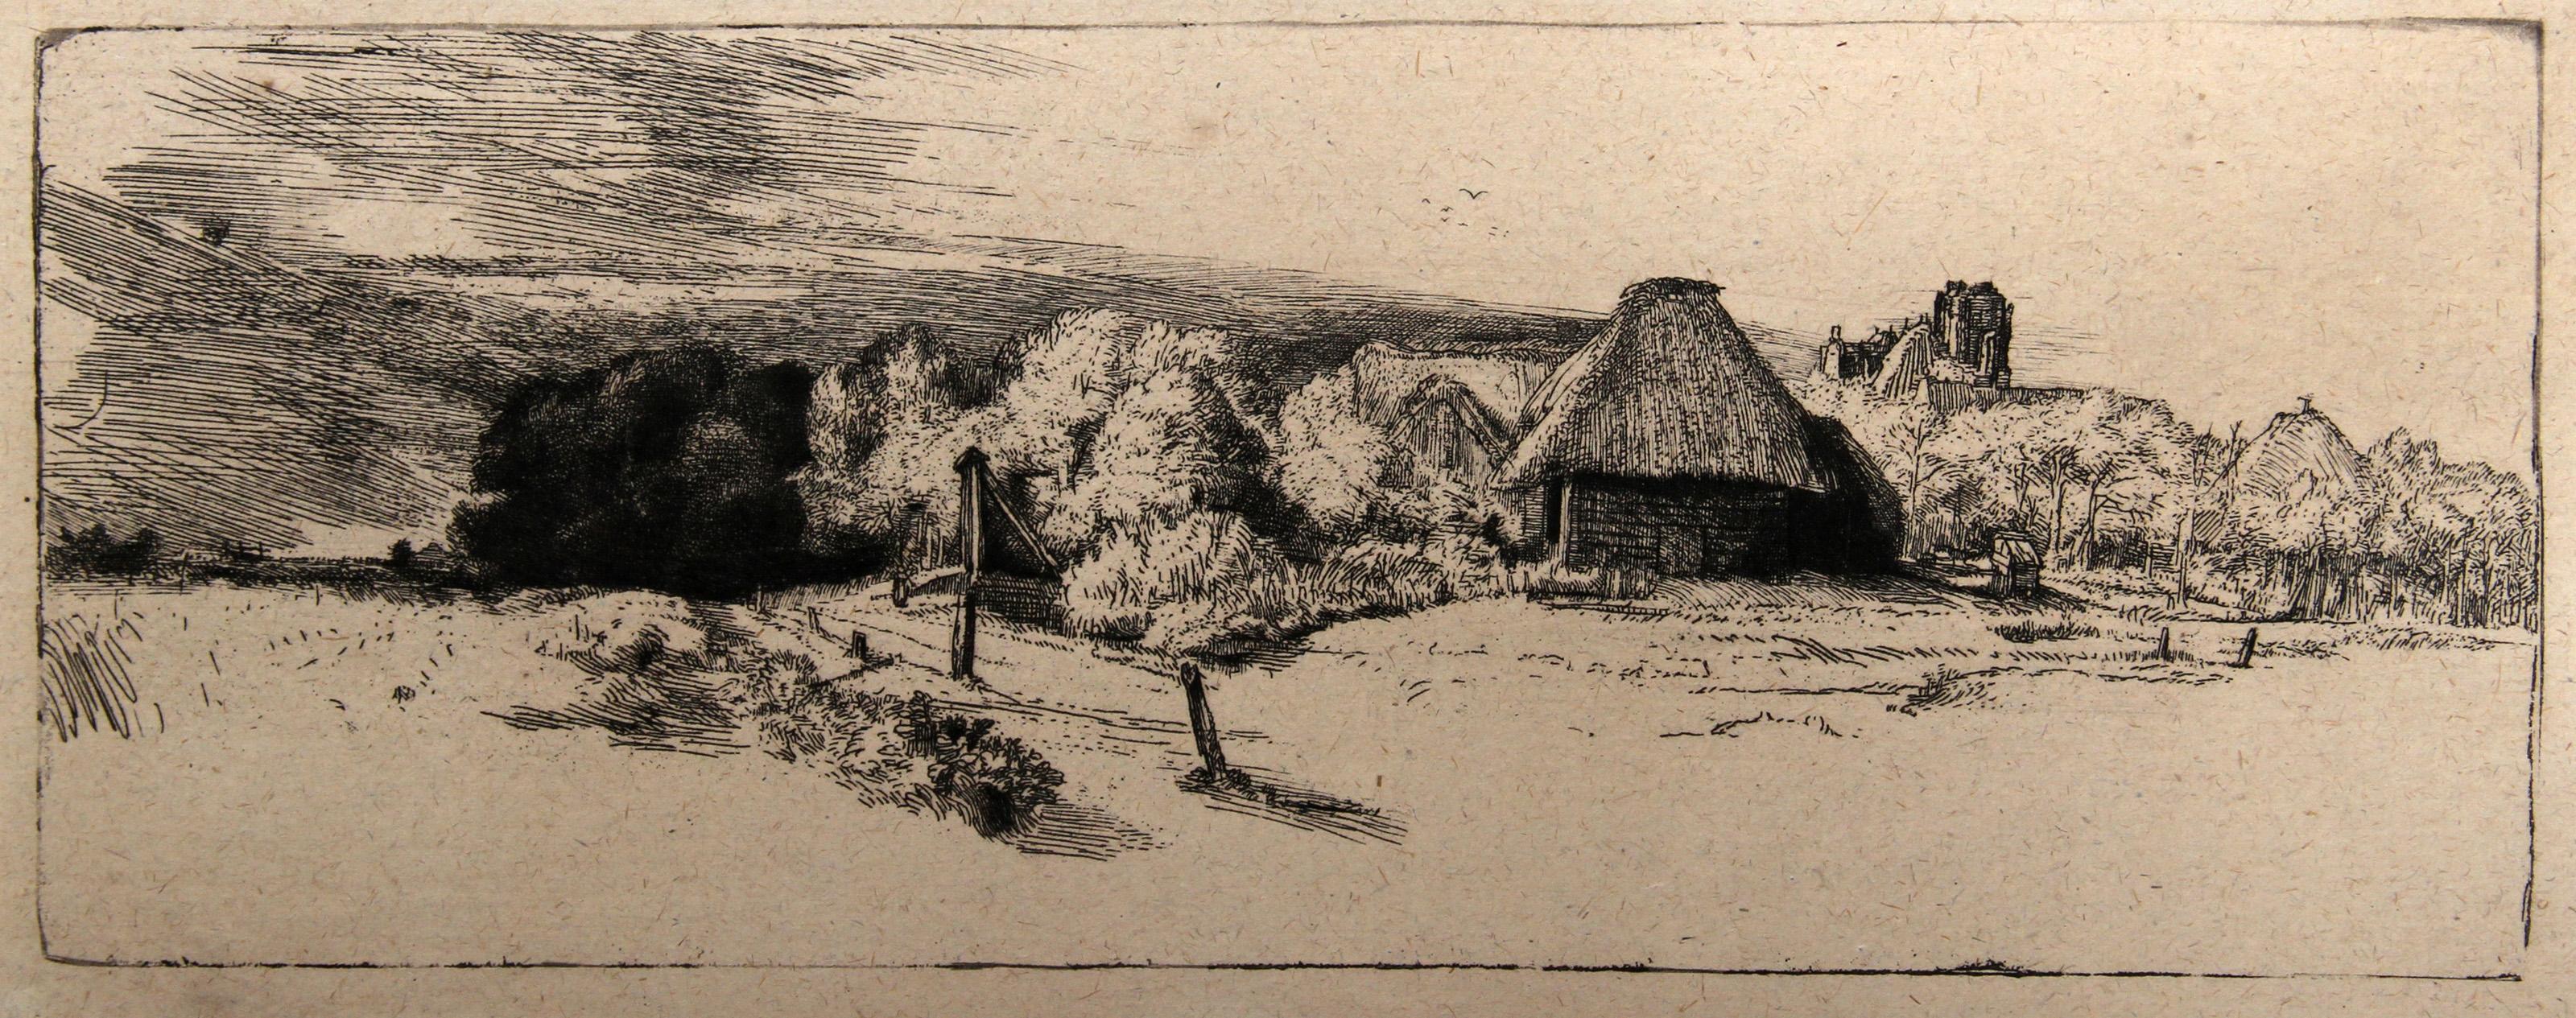 Rembrandt van Rijn, After by Amand Durand, Dutch (1606 - 1669) -  Landscape with Trees and Farm Buildings (B223). Year: 1878 (of original 1651), Medium: Heliogravure, Size: 3  x 8 in. (7.62  x 20.32 cm), Printer: Amand Durand, Description: French